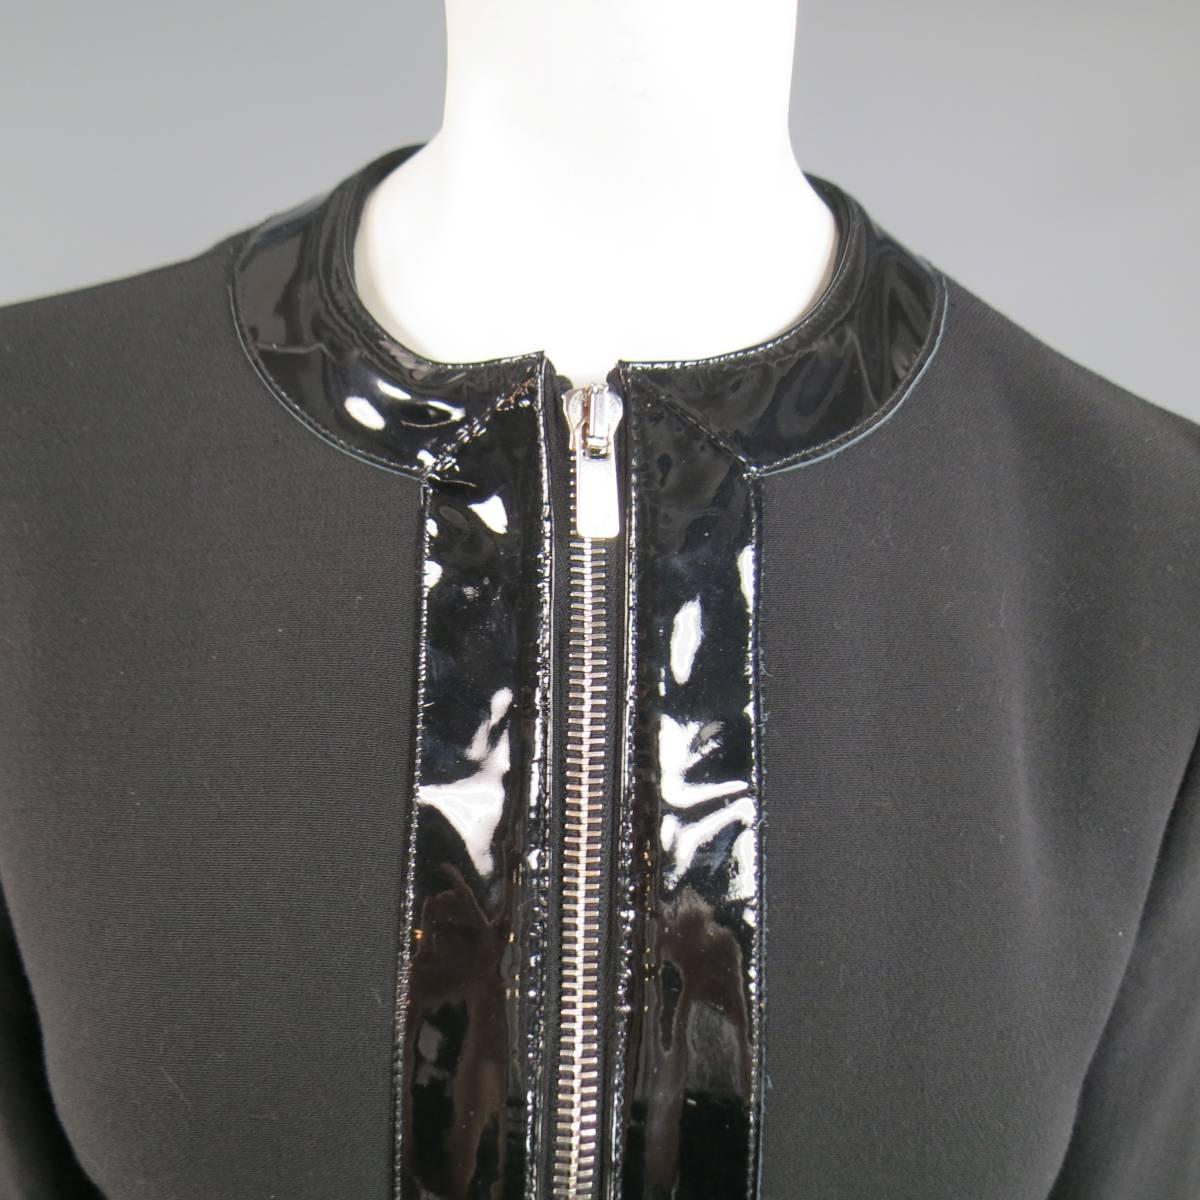 This gorgeous MICHAEL KORS jacket comes in black virgin wool and features a crew neckline, double engraved, silver tone zip closure, double zip pockets, and thick, glossy patent leather piping. Made in Italy.
Retails at $1995.00.
 
Excellent